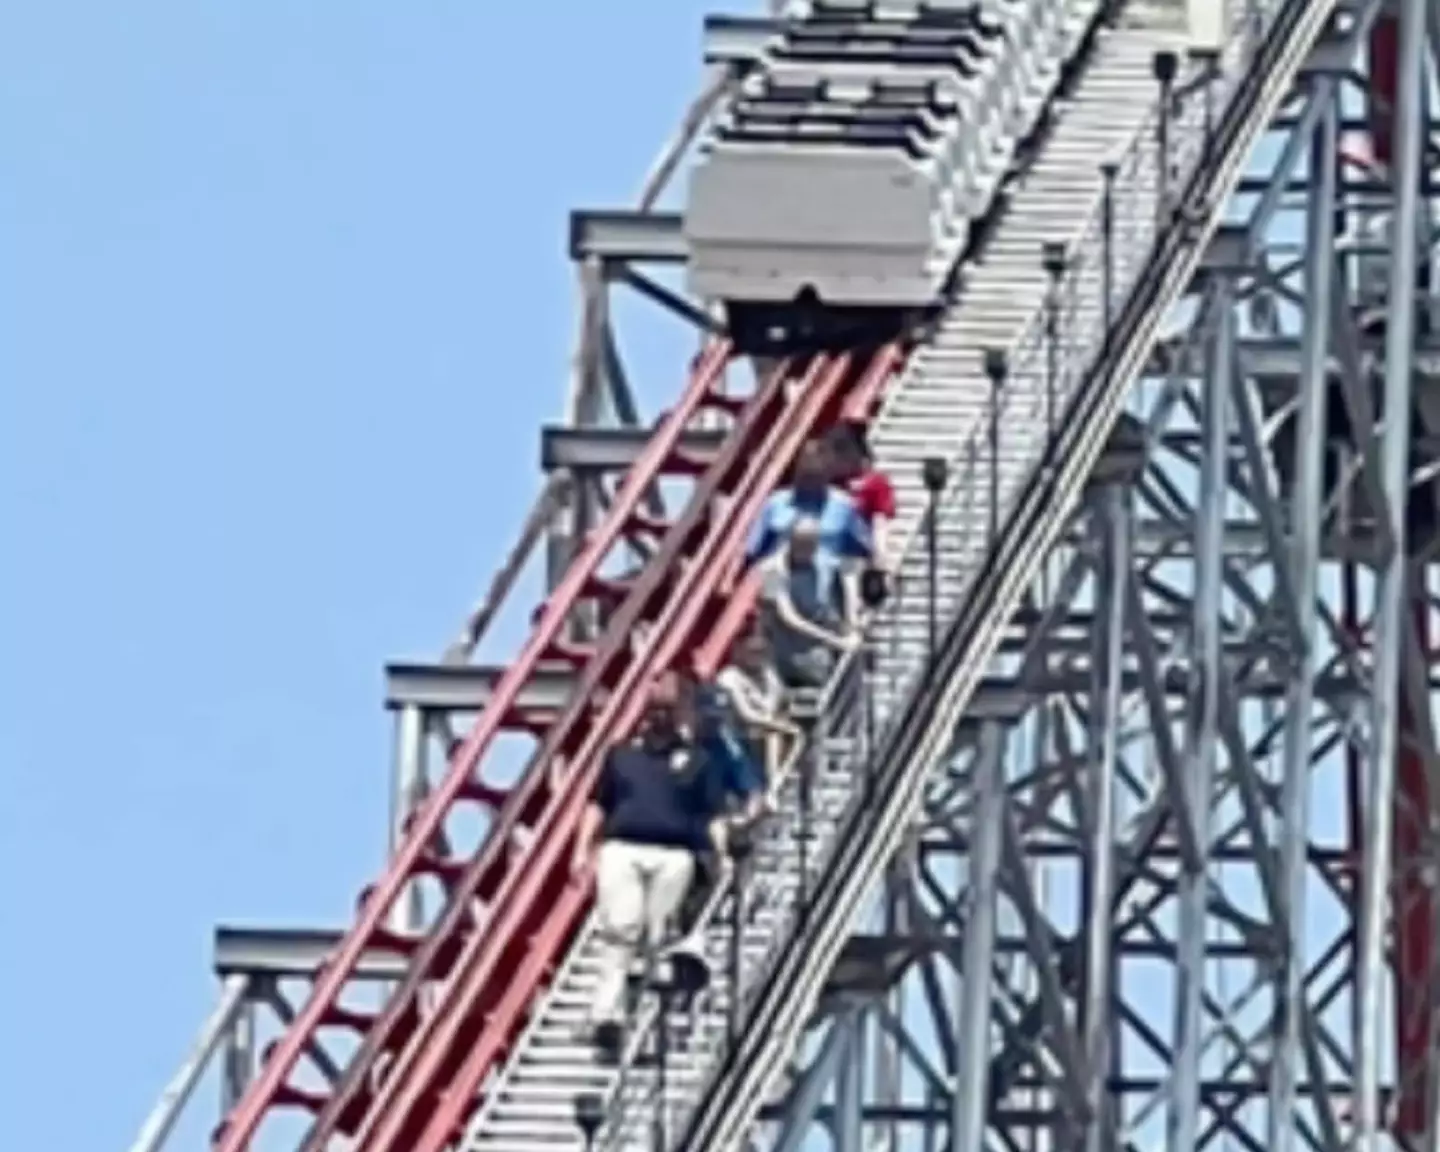 Riders could be seen clinging on as they descended the ride.